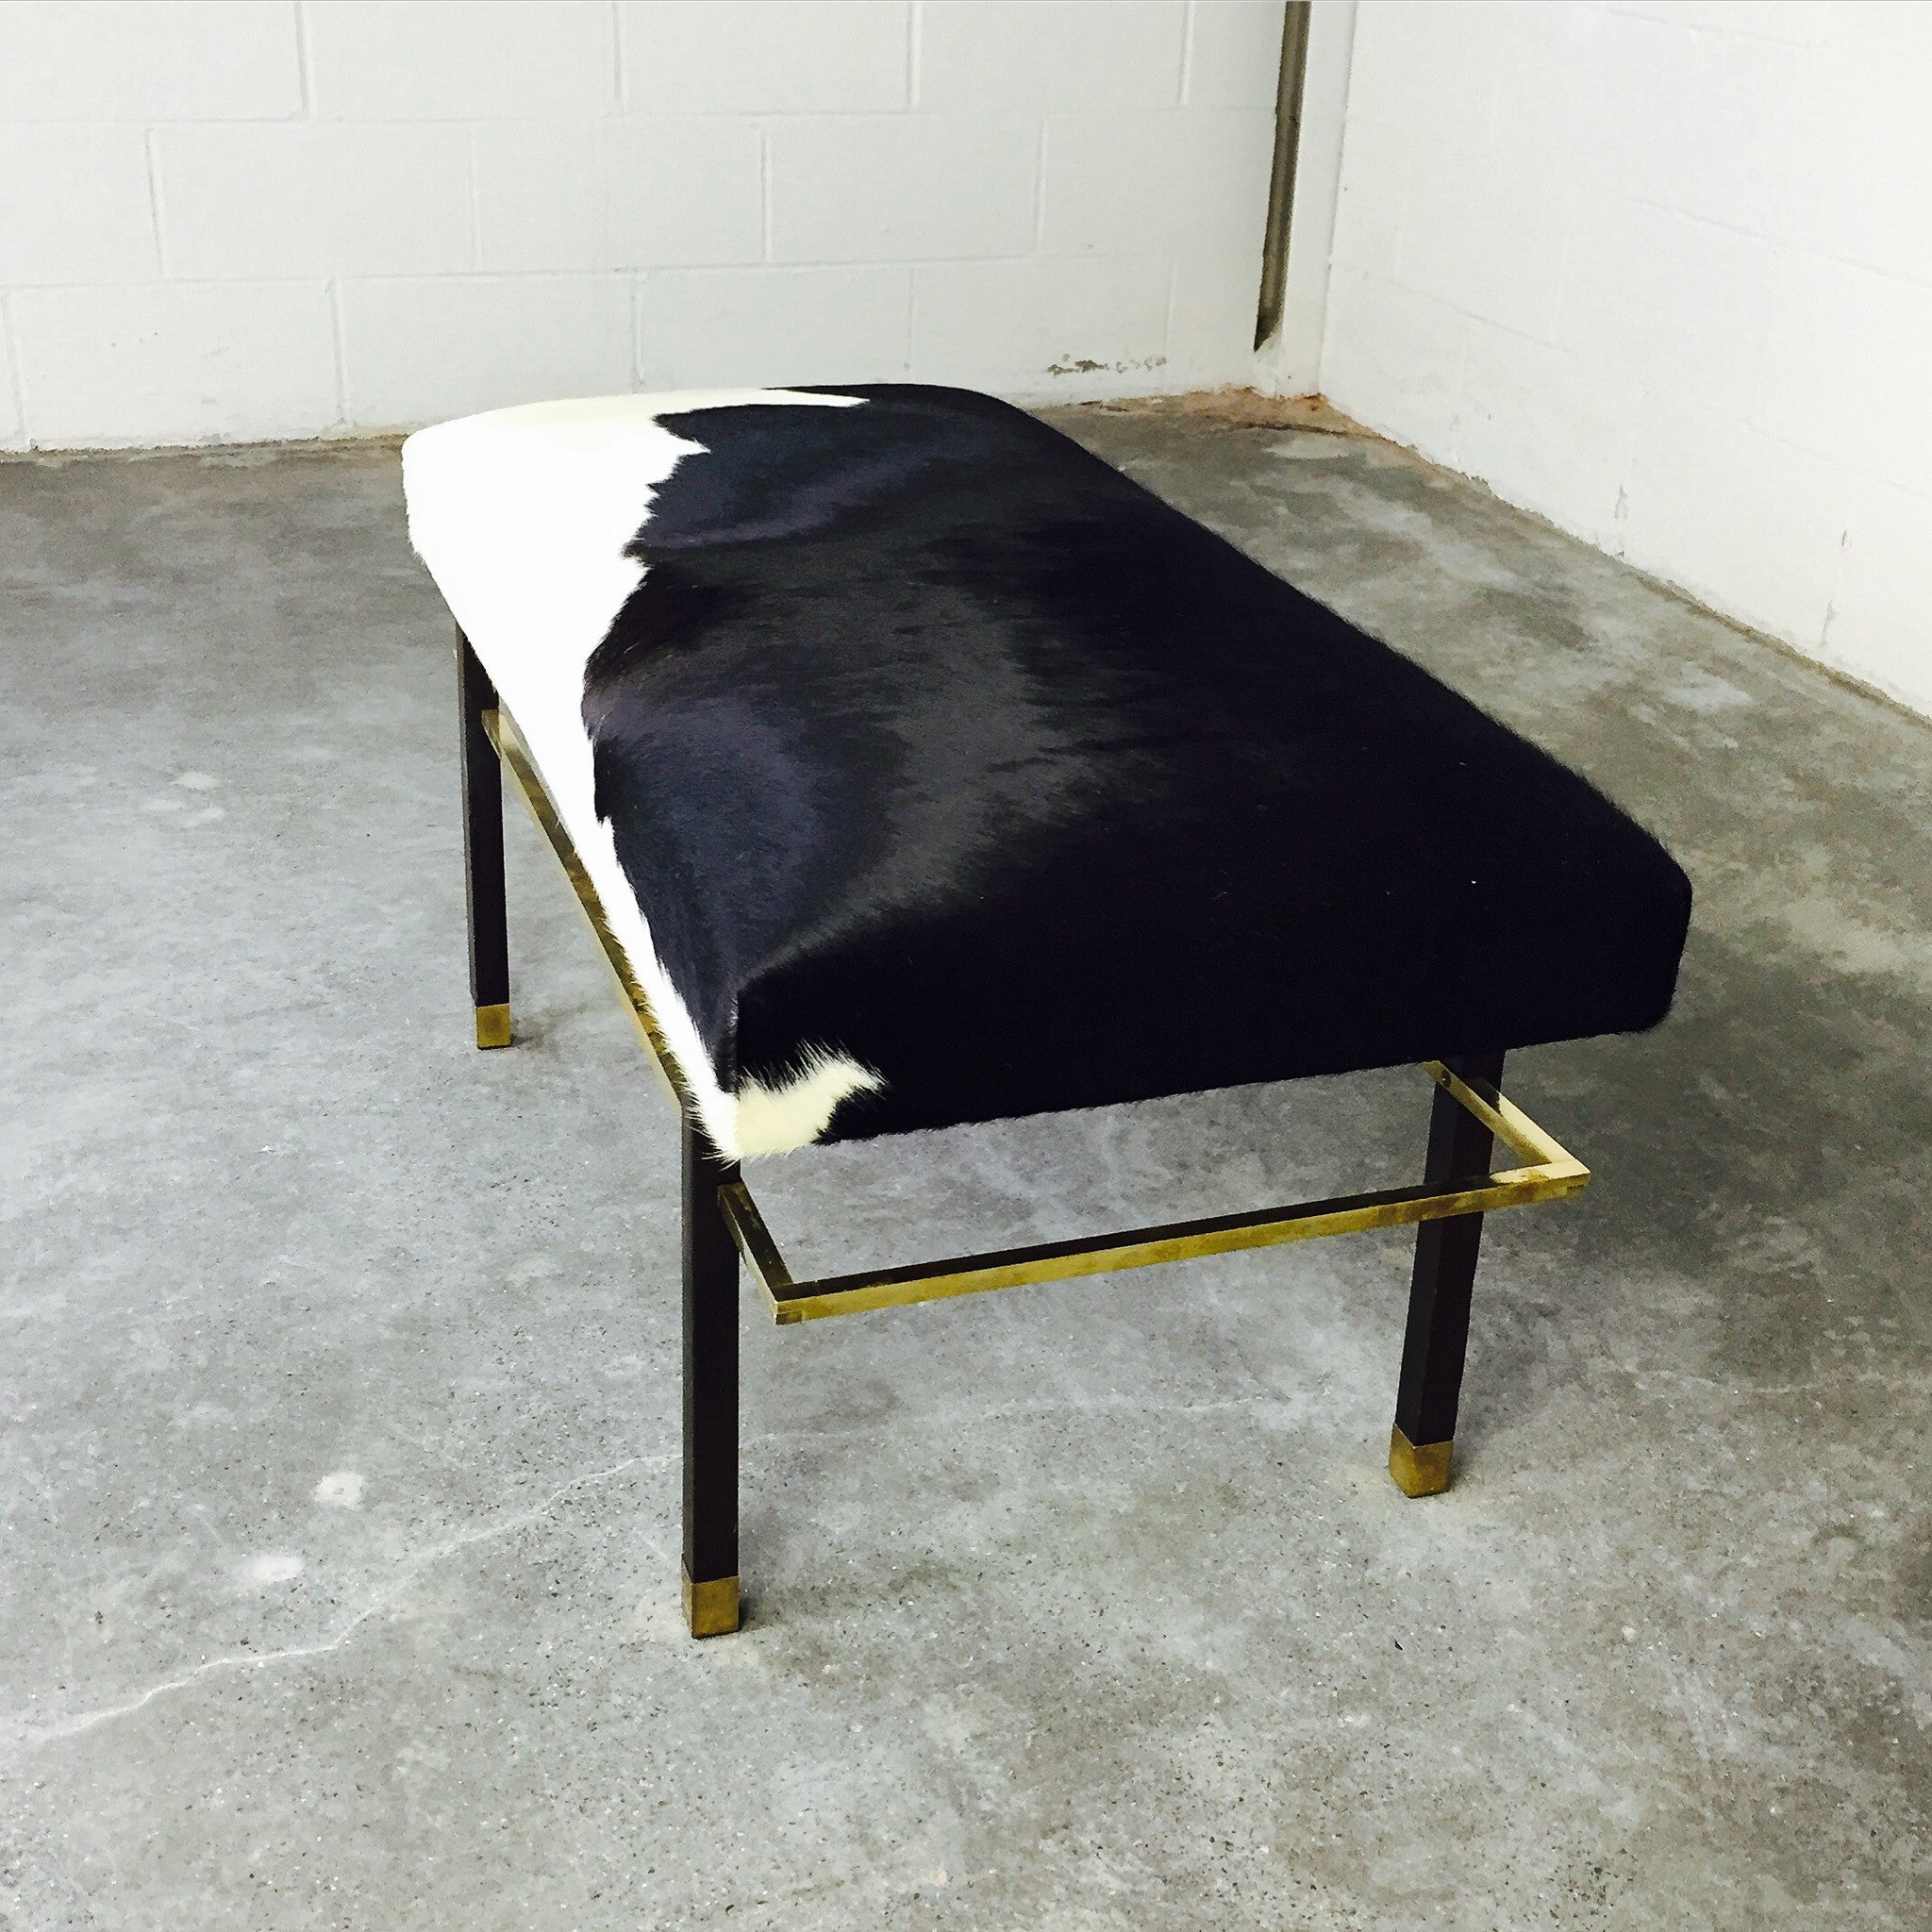 Mahogany and Brass Bench in Brazilian Cowhide - FORSYTH